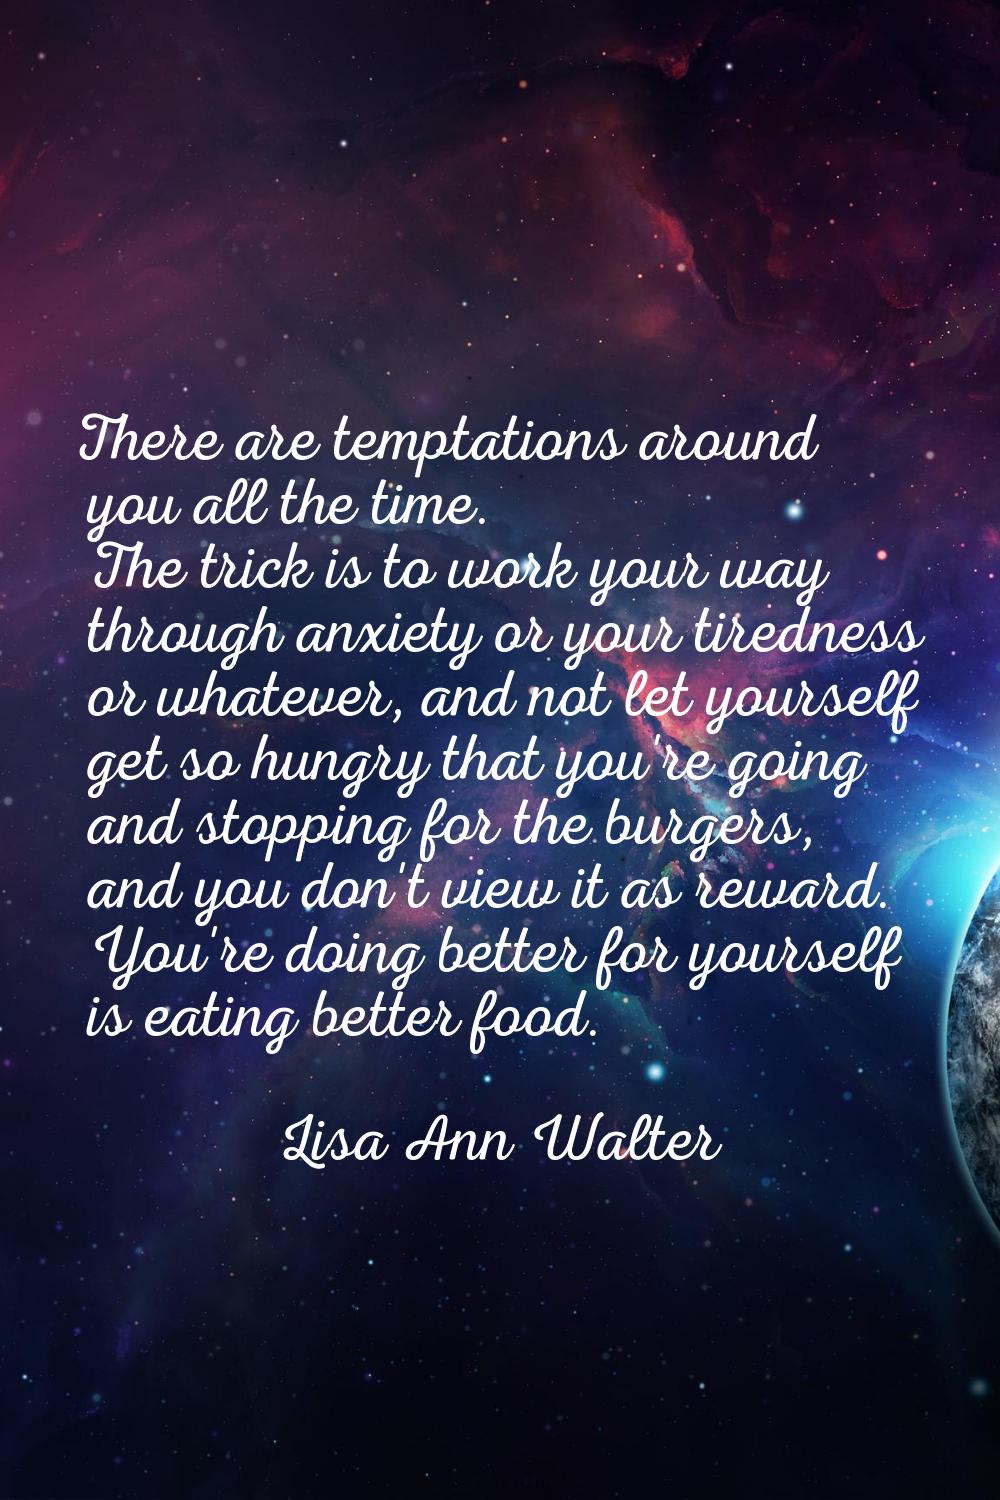 There are temptations around you all the time. The trick is to work your way through anxiety or you